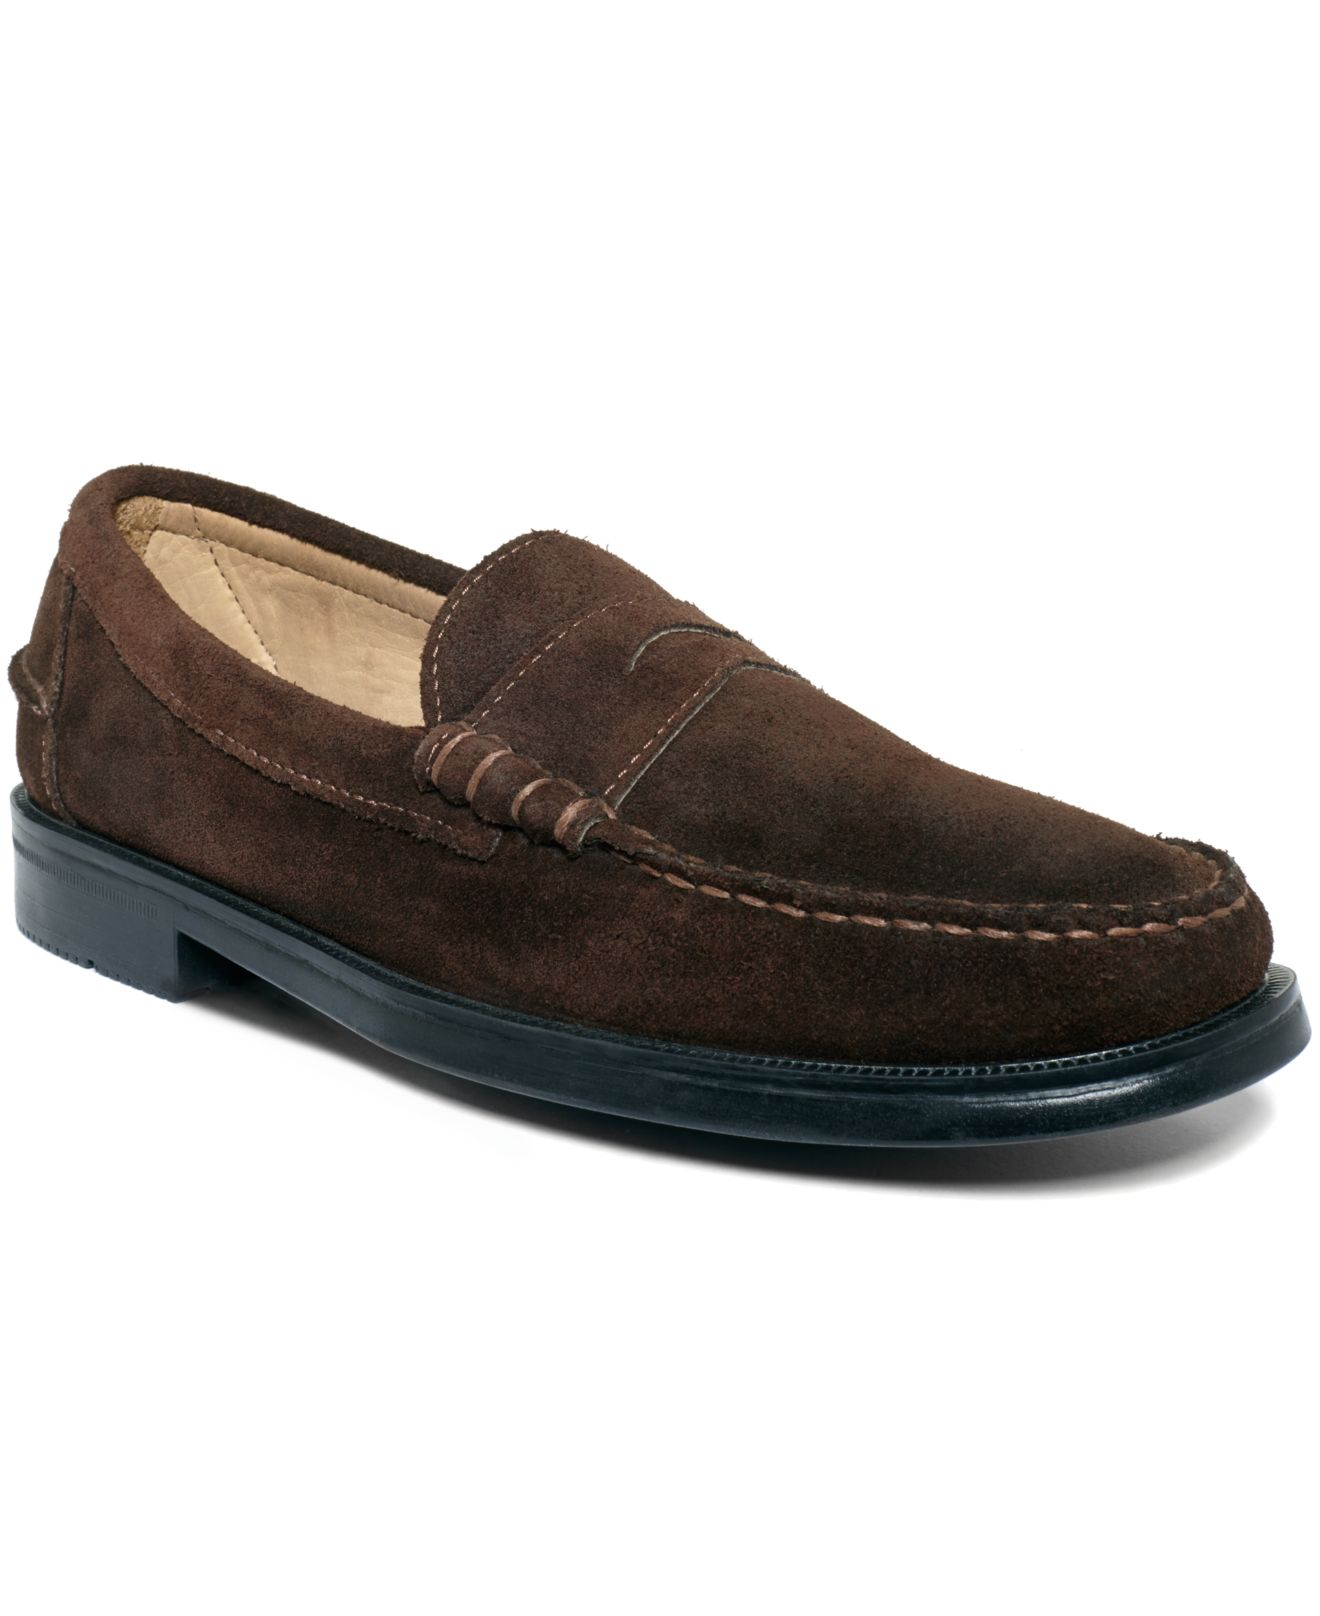 Lyst - Sebago Grant Beef Roll Penny Loafers in Brown for Men